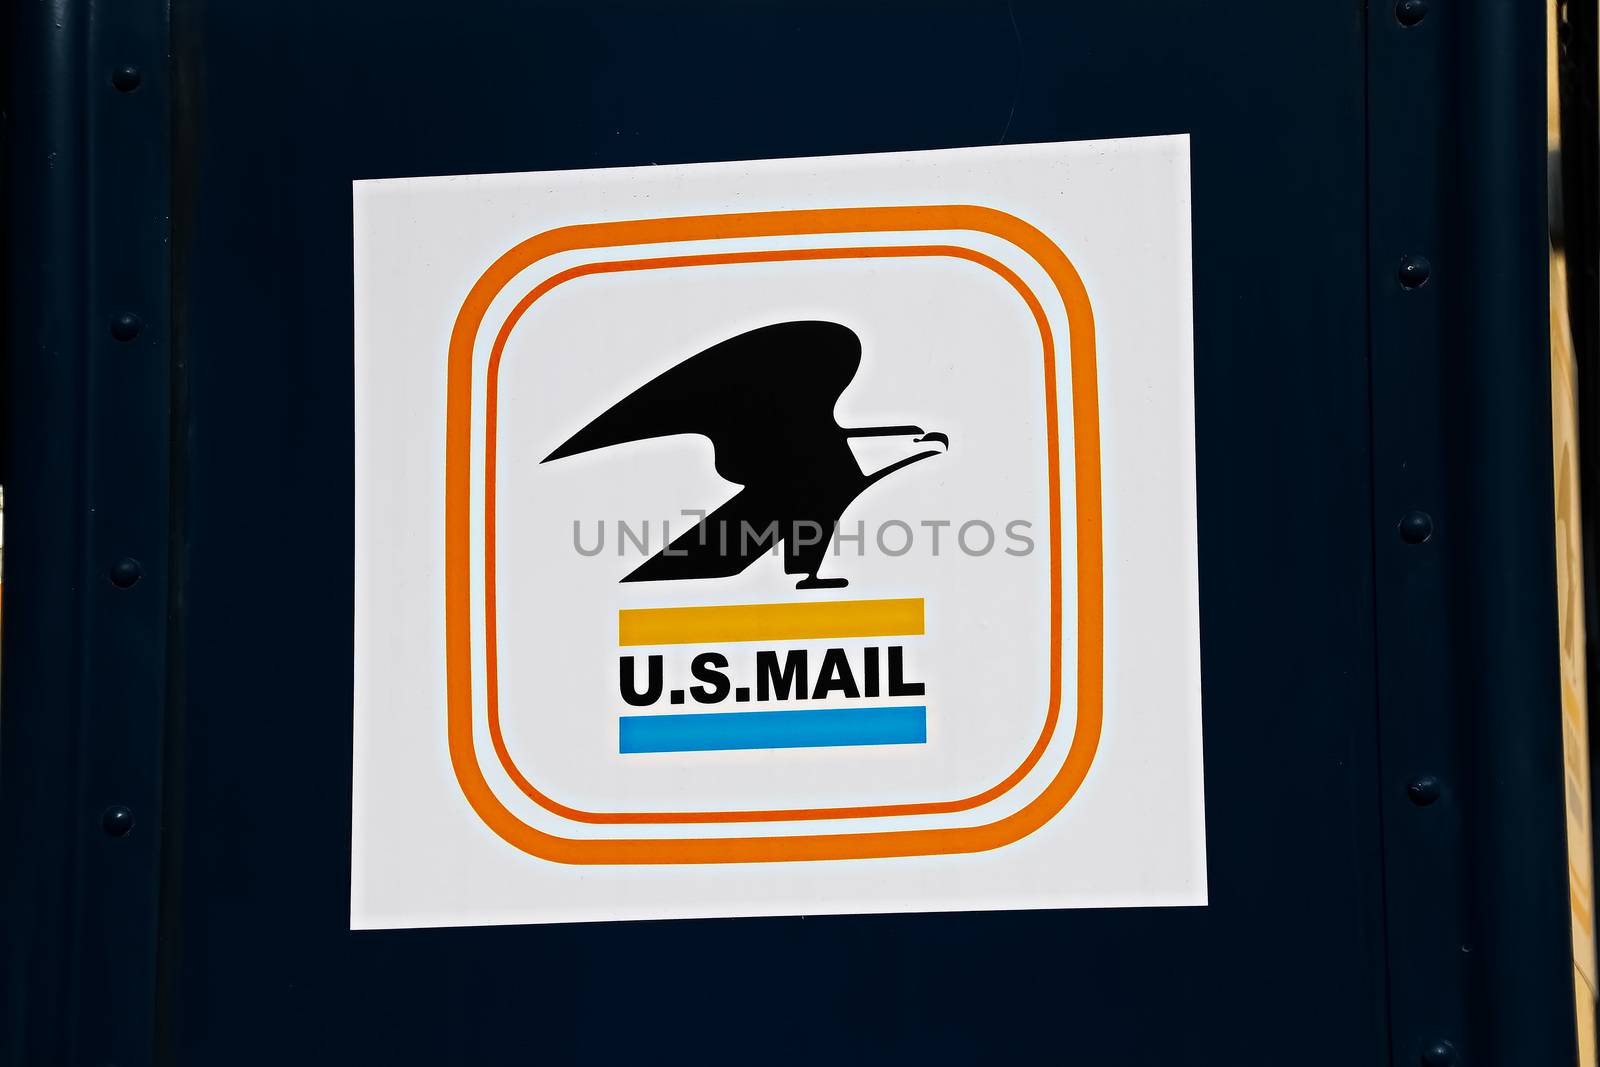 Los Angeles,CA/USA - Nov 23,2019 : Close up of the United States Postal Service eagle logo on a neighborhood postal mailbox, as seen on election day.